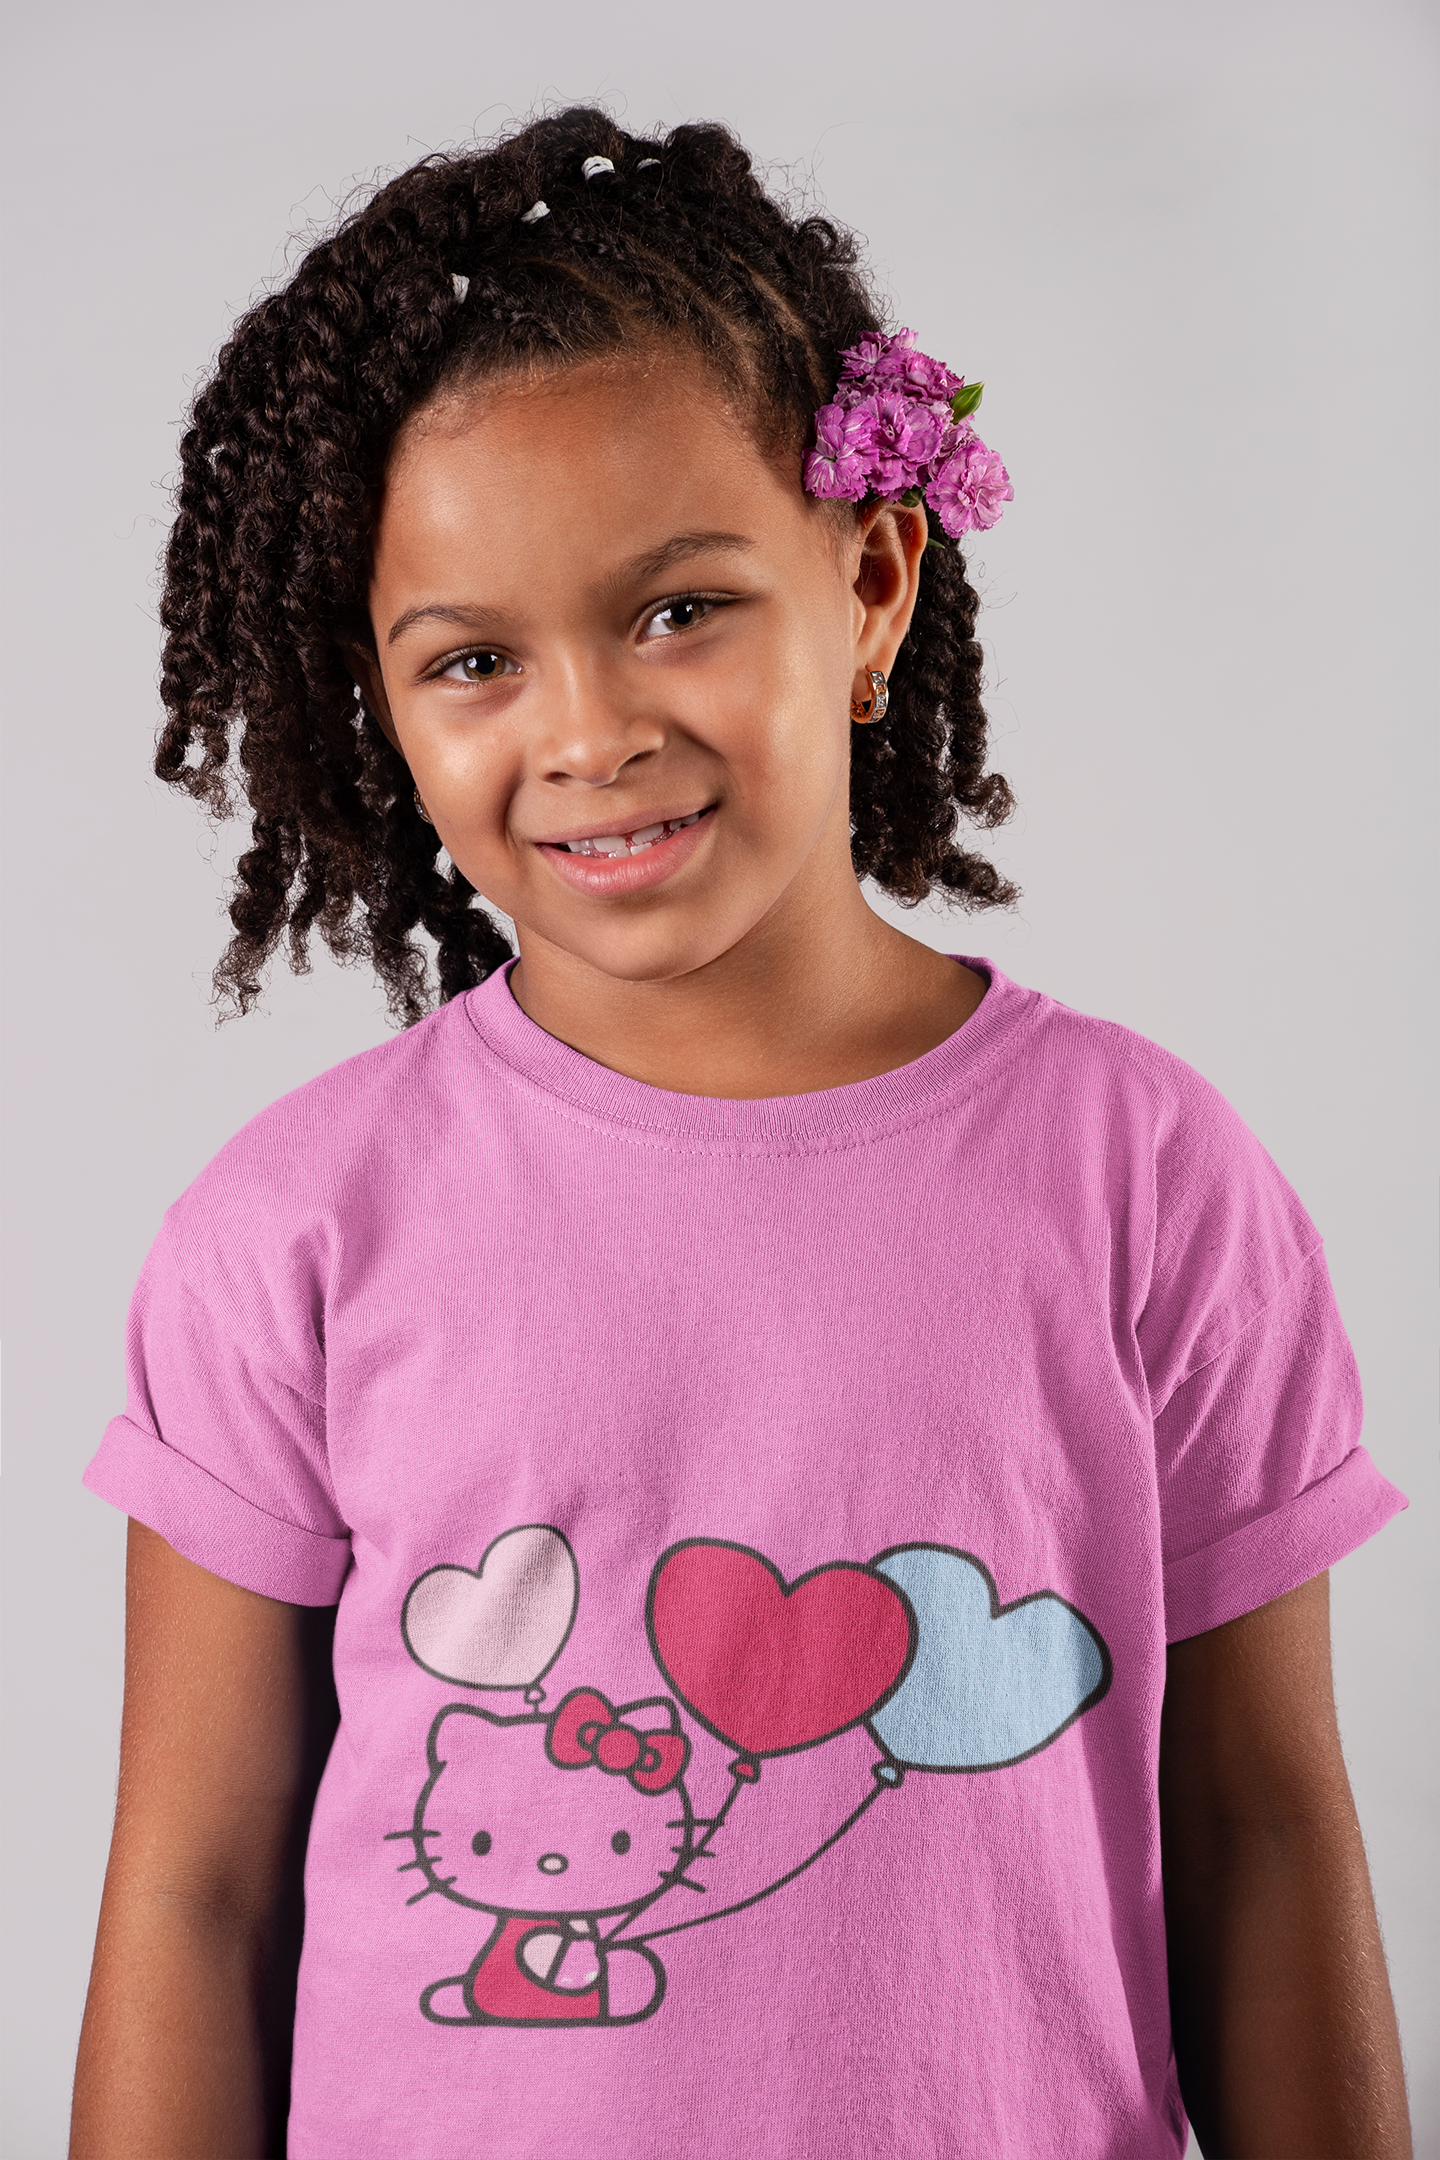 Hello Kitty Inspired With Balloons Ladies T Shirt